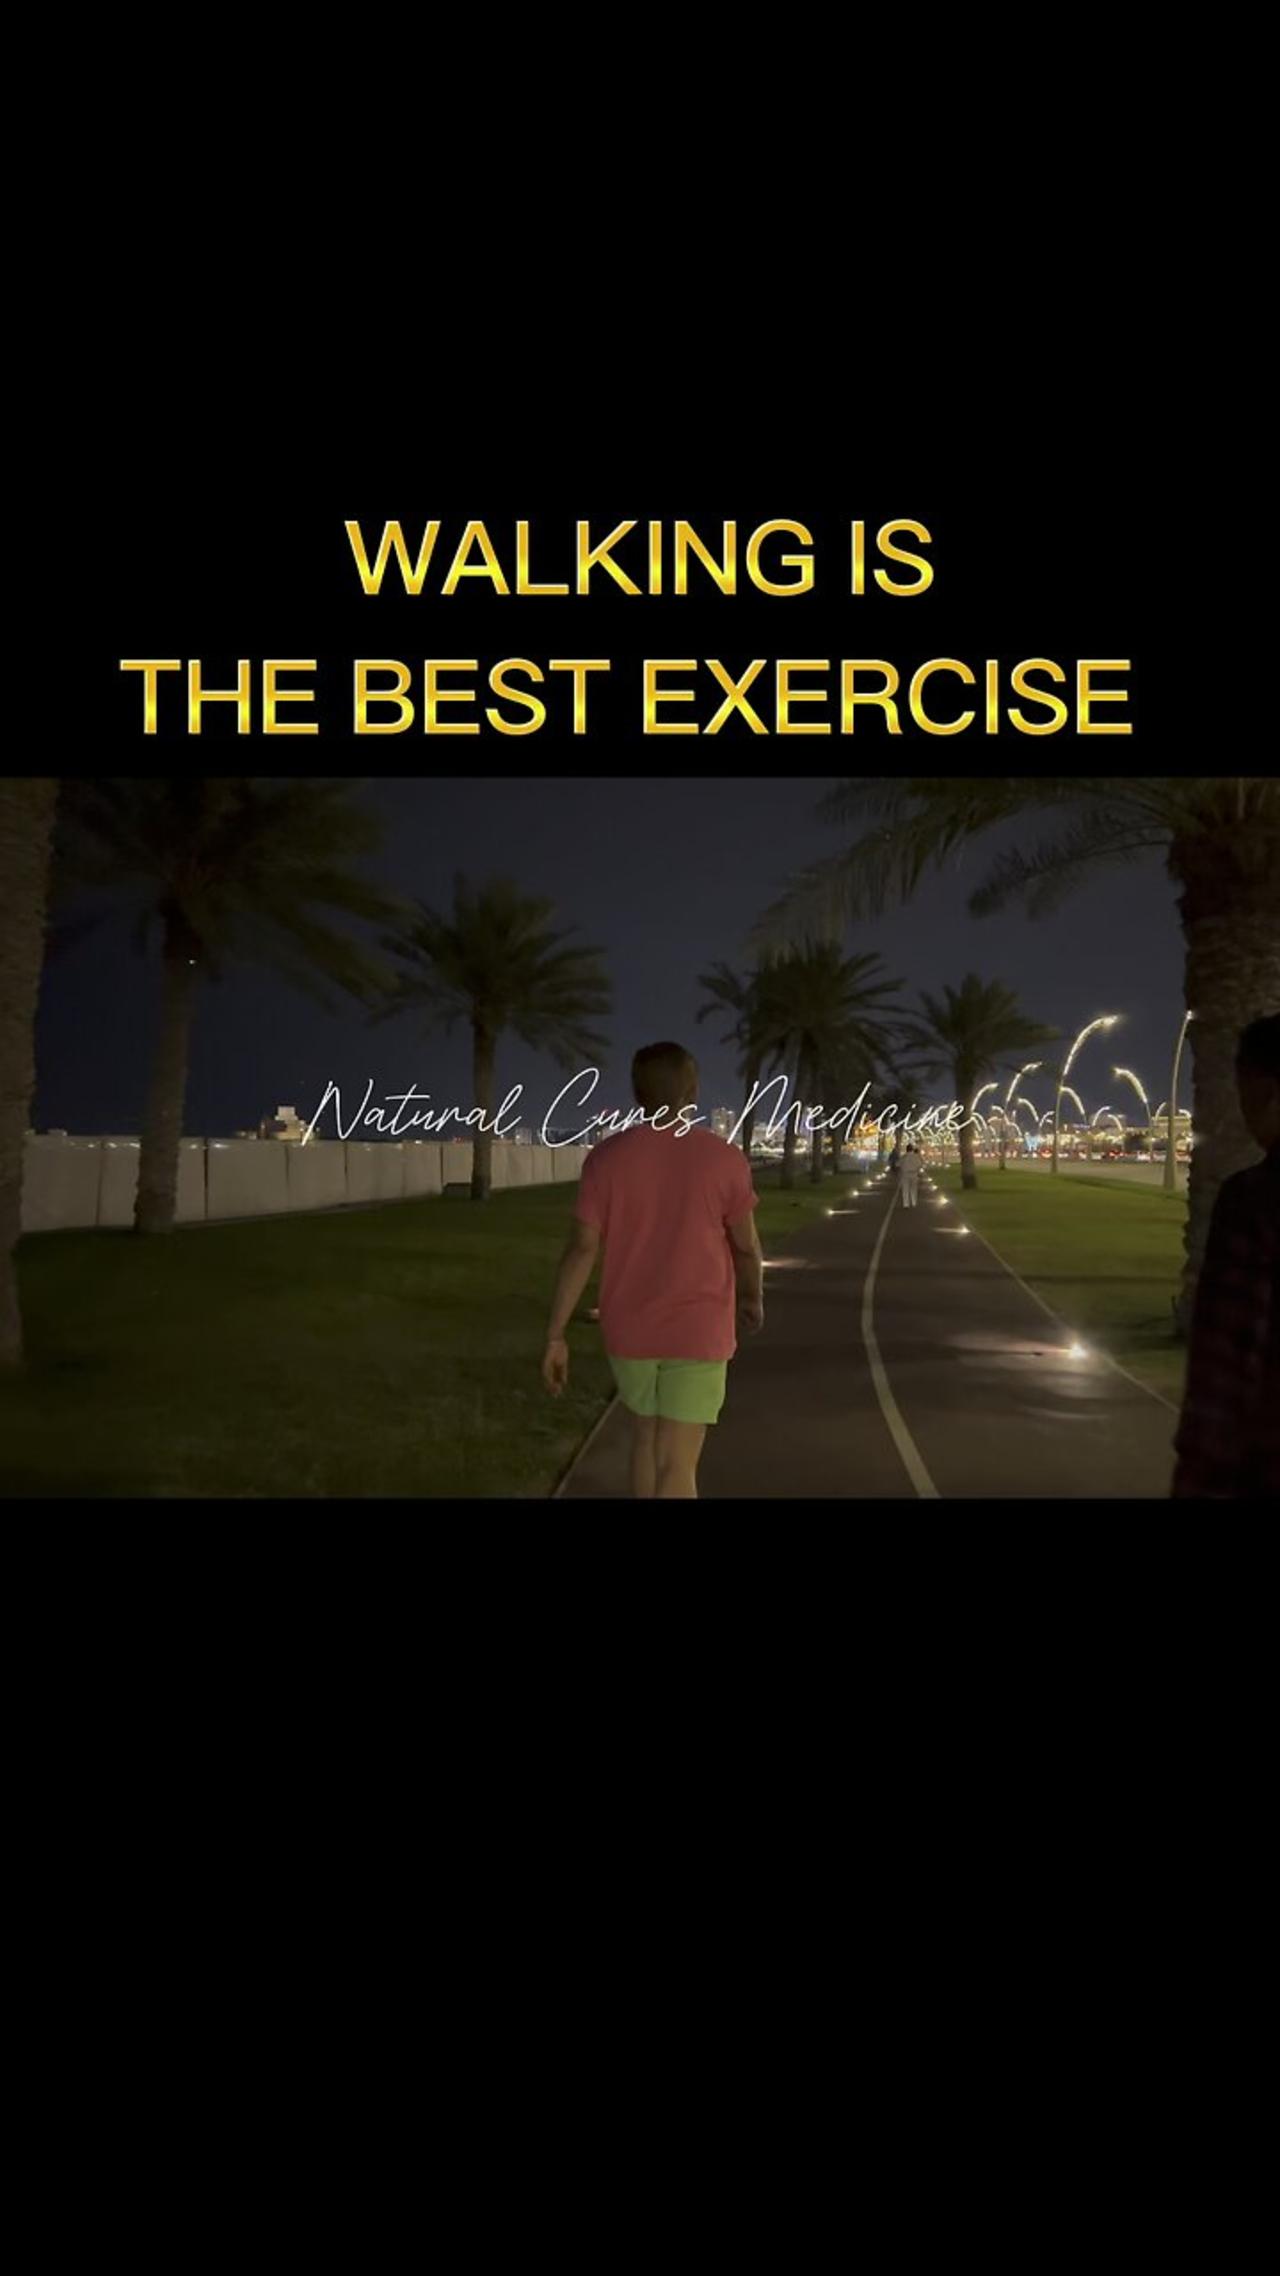 Walking is the best Exercise